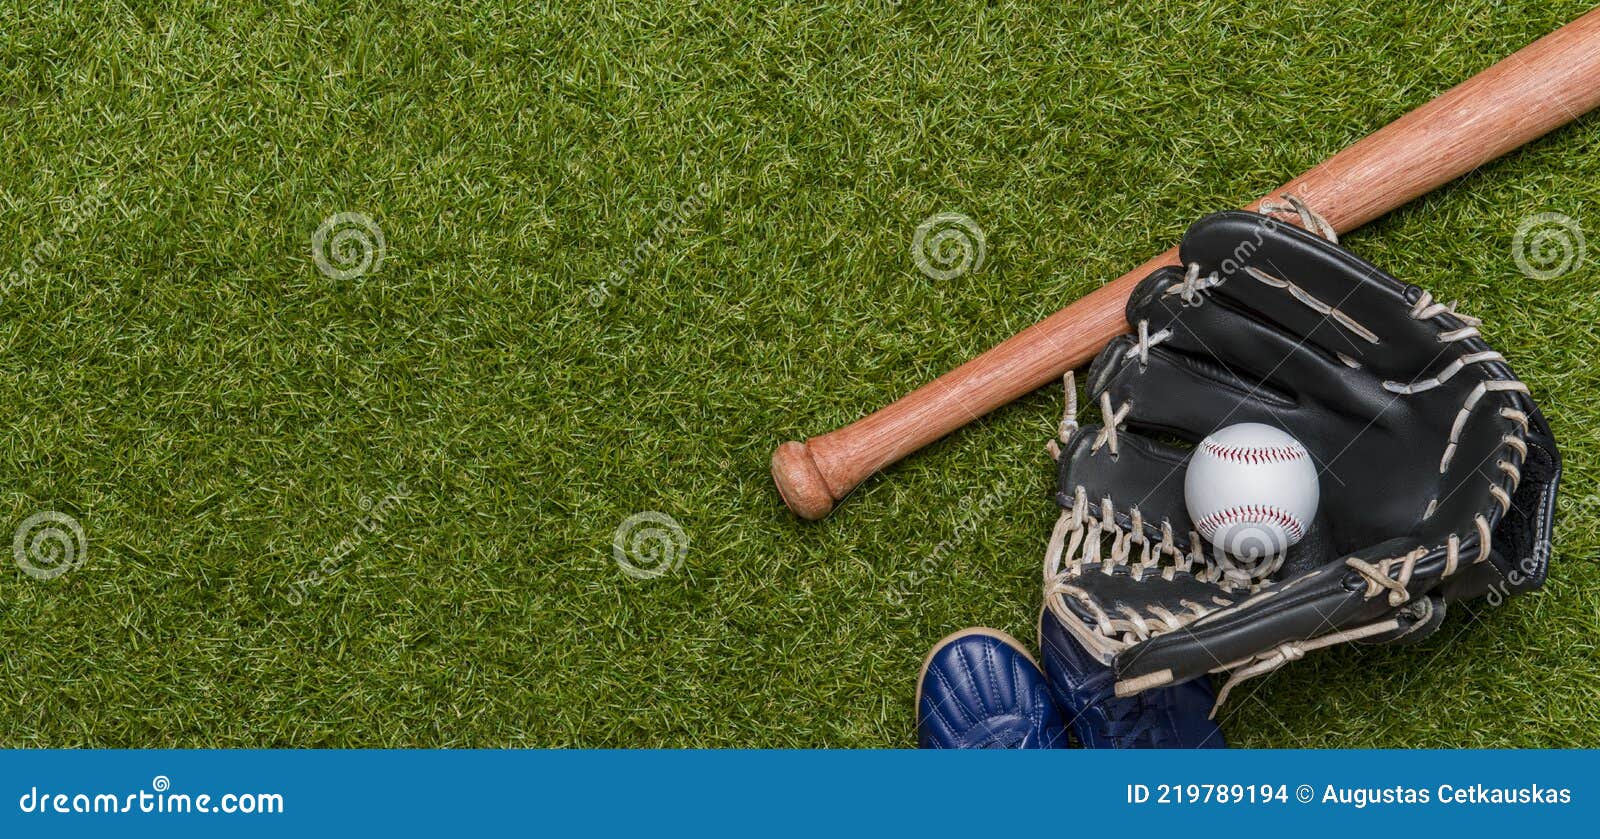 baseball bat, shoes, glove and ball on green grass field. sport theme background with copy space for text and advertisment